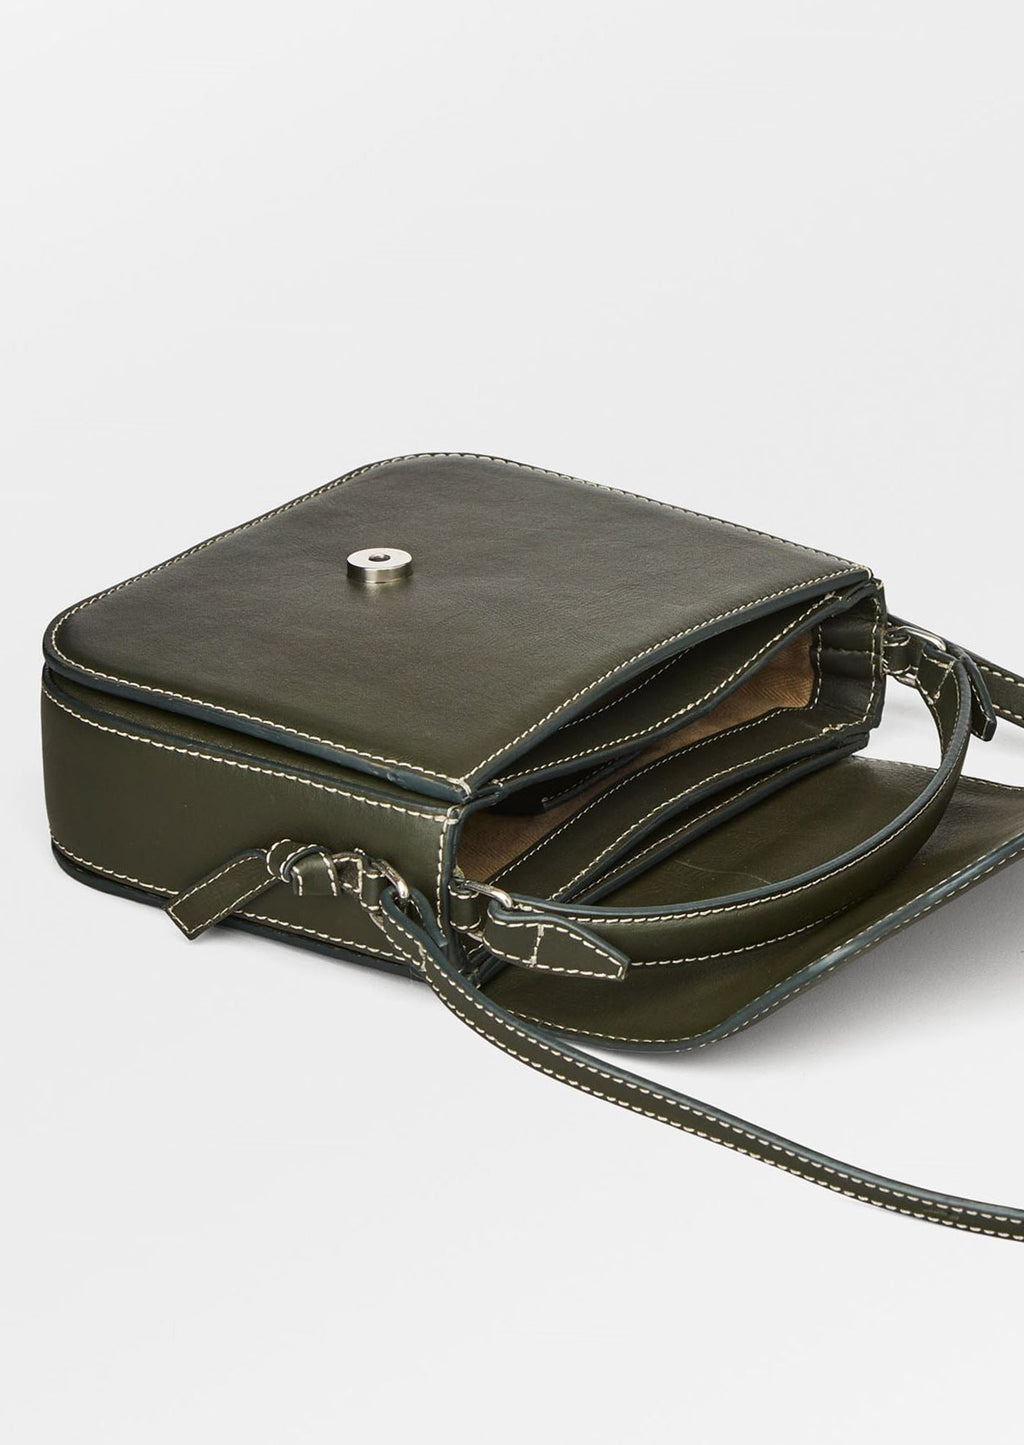 3: A leather handbag in khaki green with white contrast stitching and flap front design.